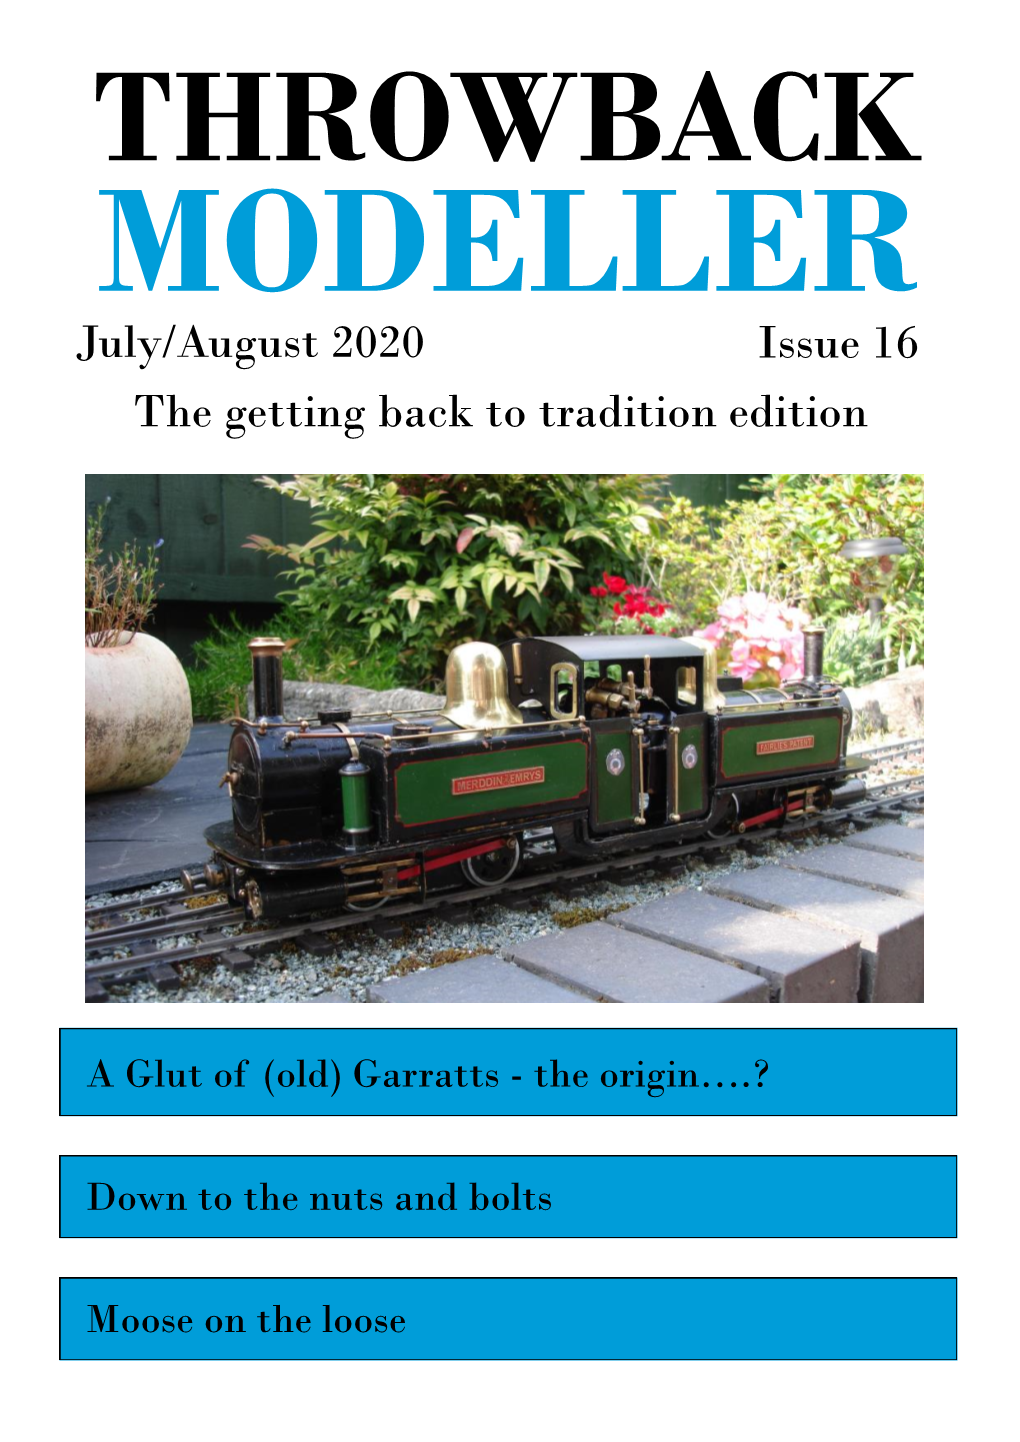 THROWBACK MODELLER July/August 2020 Issue 16 the Getting Back to Tradition Edition